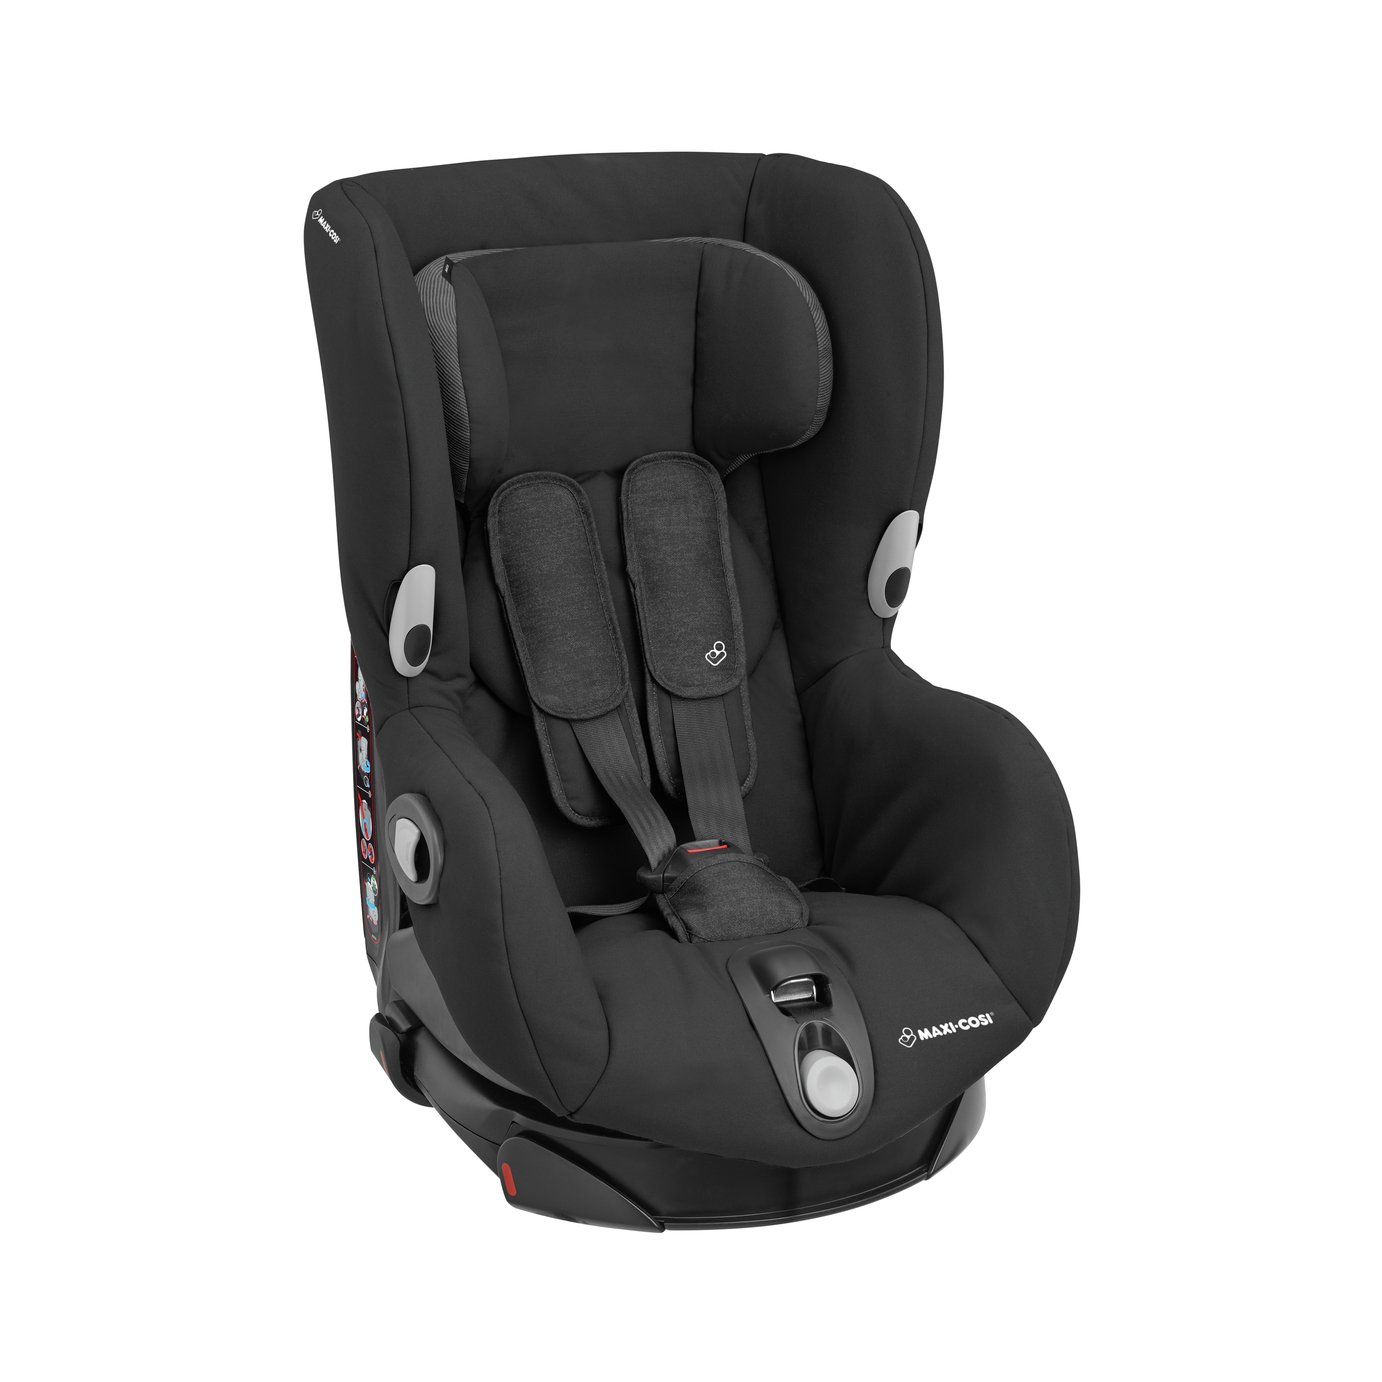 Maxi-Cosi Axiss Group 1 Car Seat - Authentic Black 